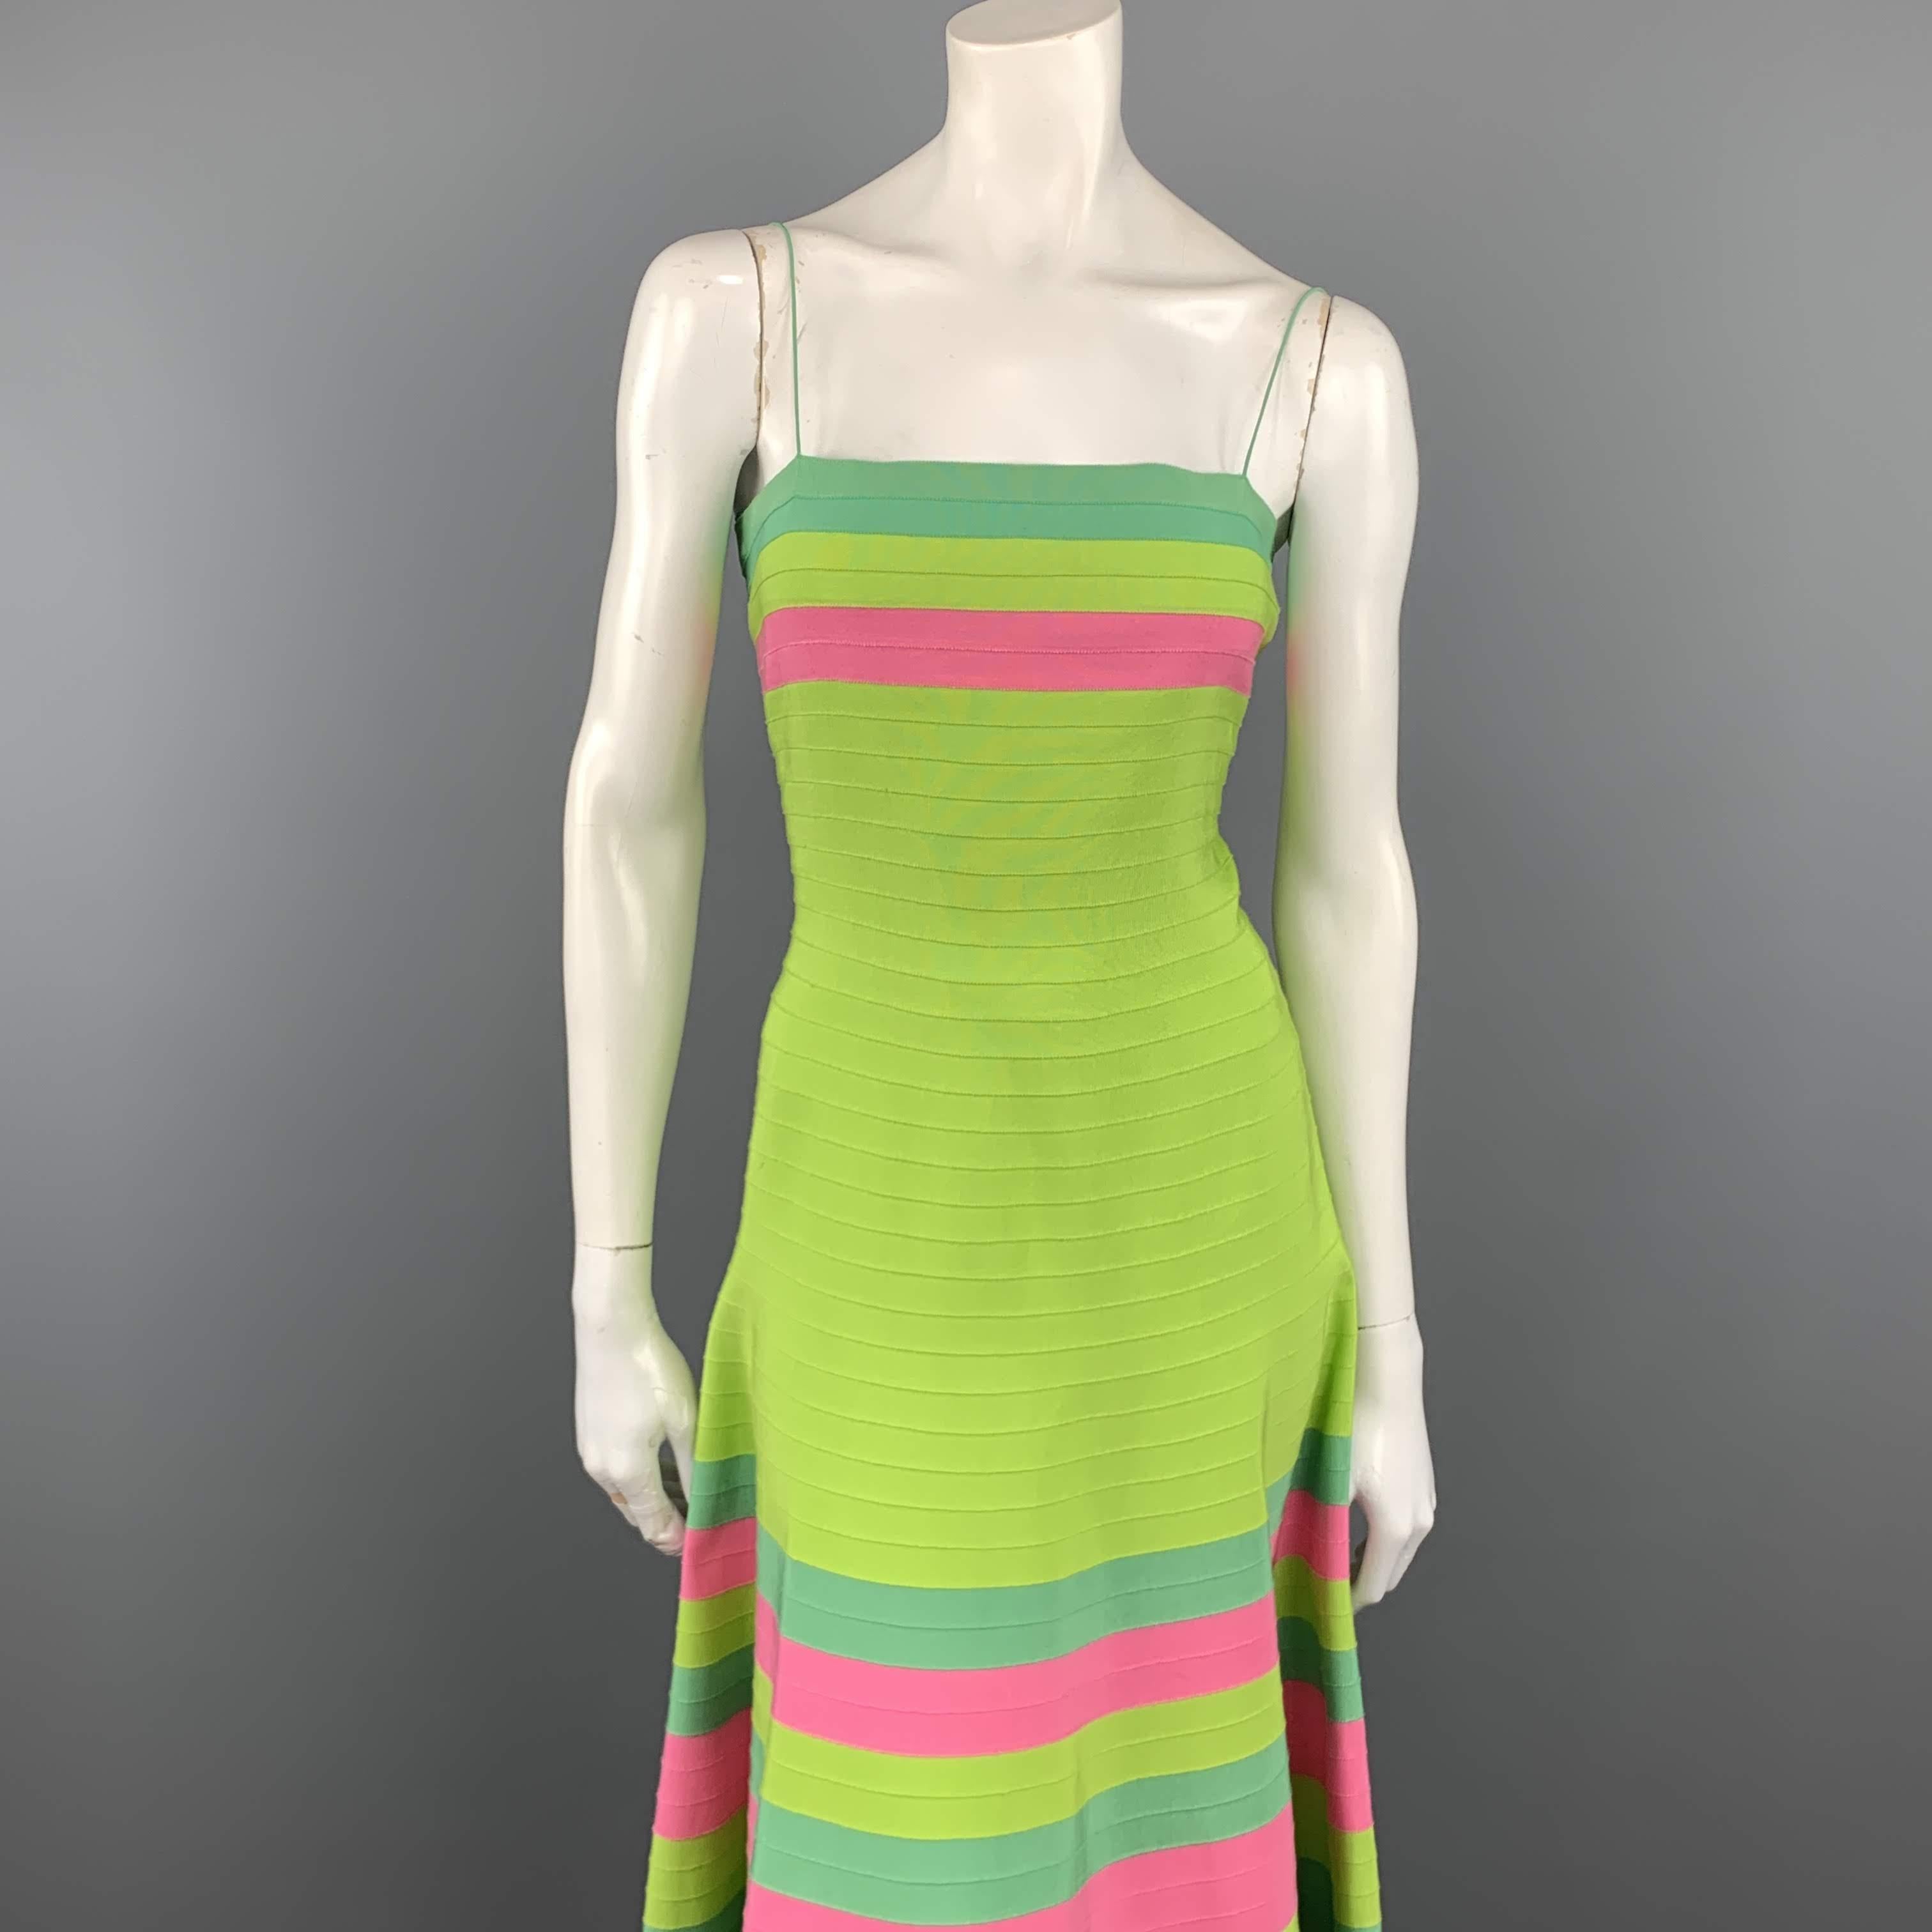 Vintage OSCAR DE LA RENTA down comes in lime green grosgrain ribbon with turquoise and pink color block stripe pattern, straight bustier neckline, skinny straps, and flaired skirt. Spots shown in detail shots. As-is. Made in USA.
 
Very Good